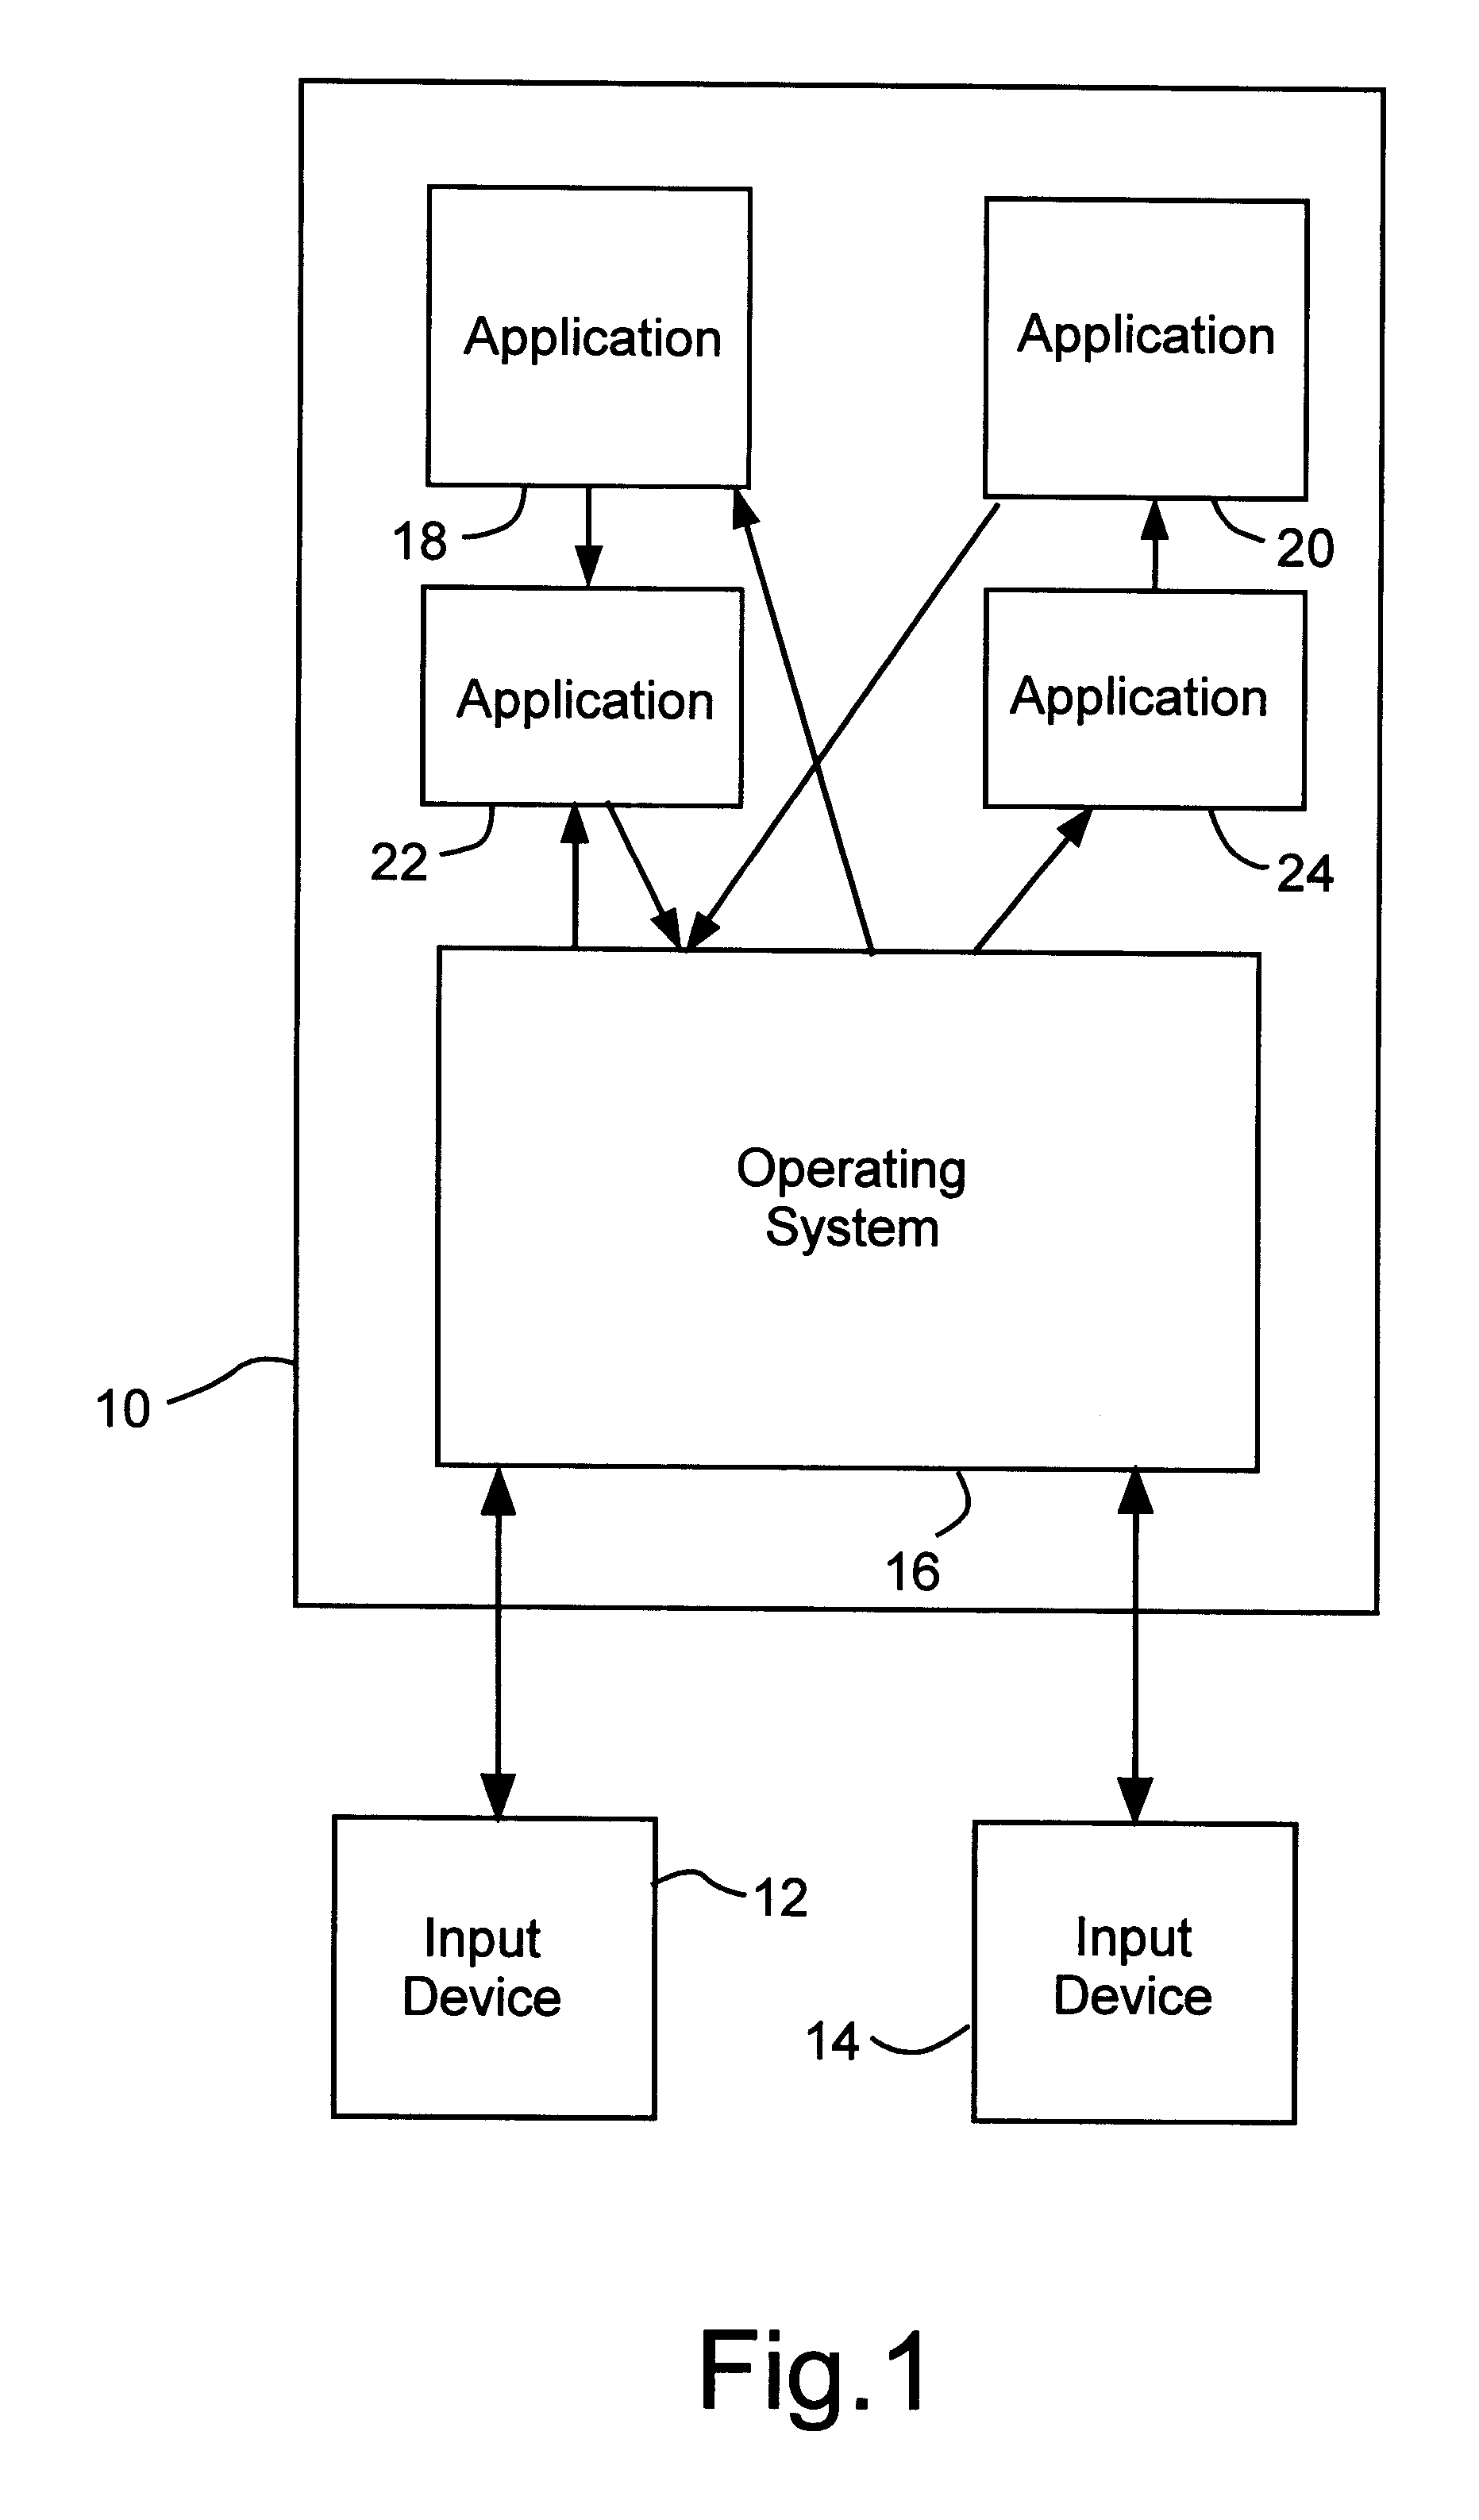 Configurable operating system having multiple data conversion applications for I/O connectivity